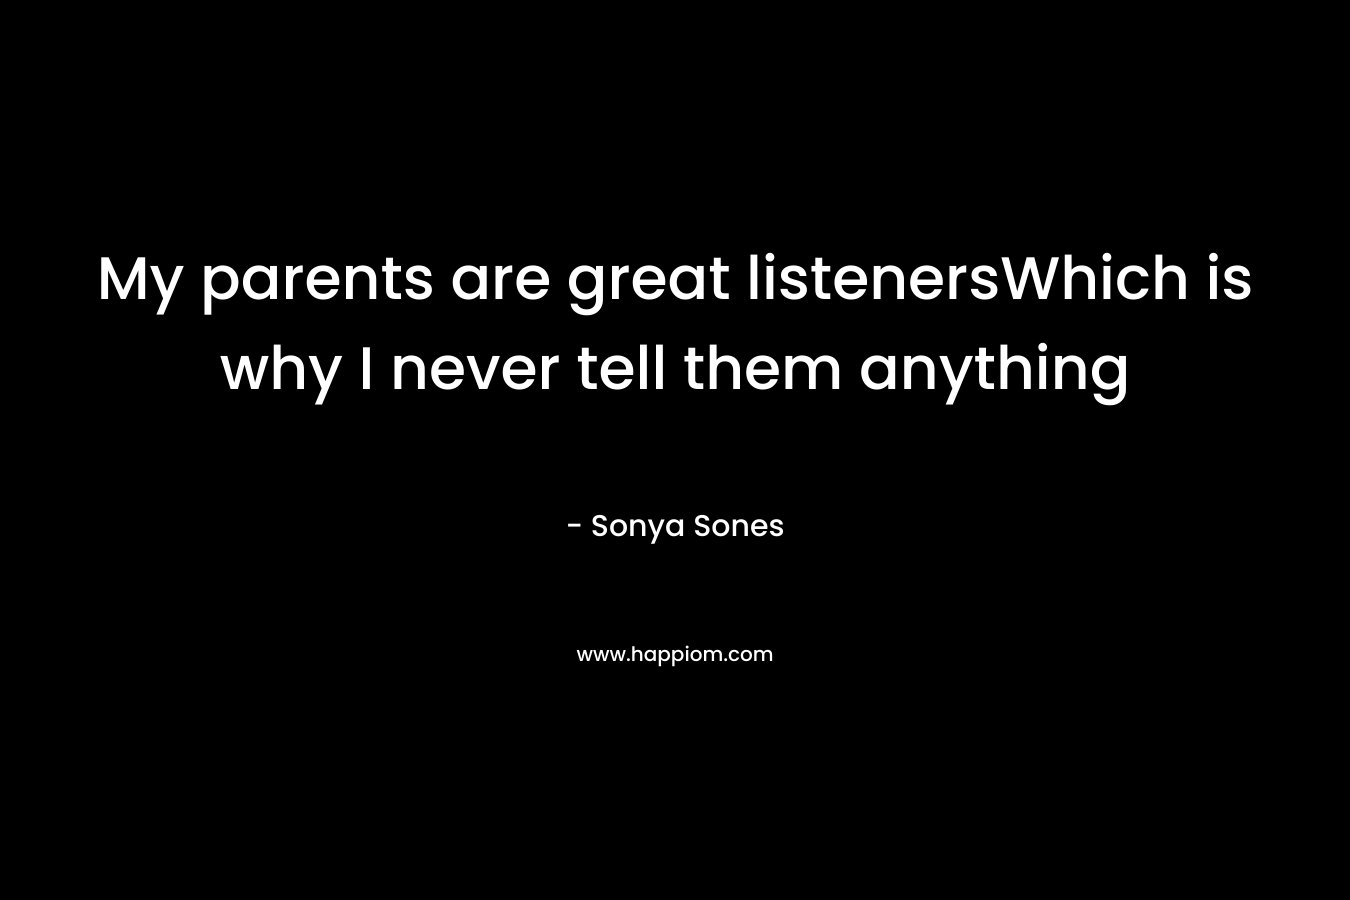 My parents are great listenersWhich is why I never tell them anything